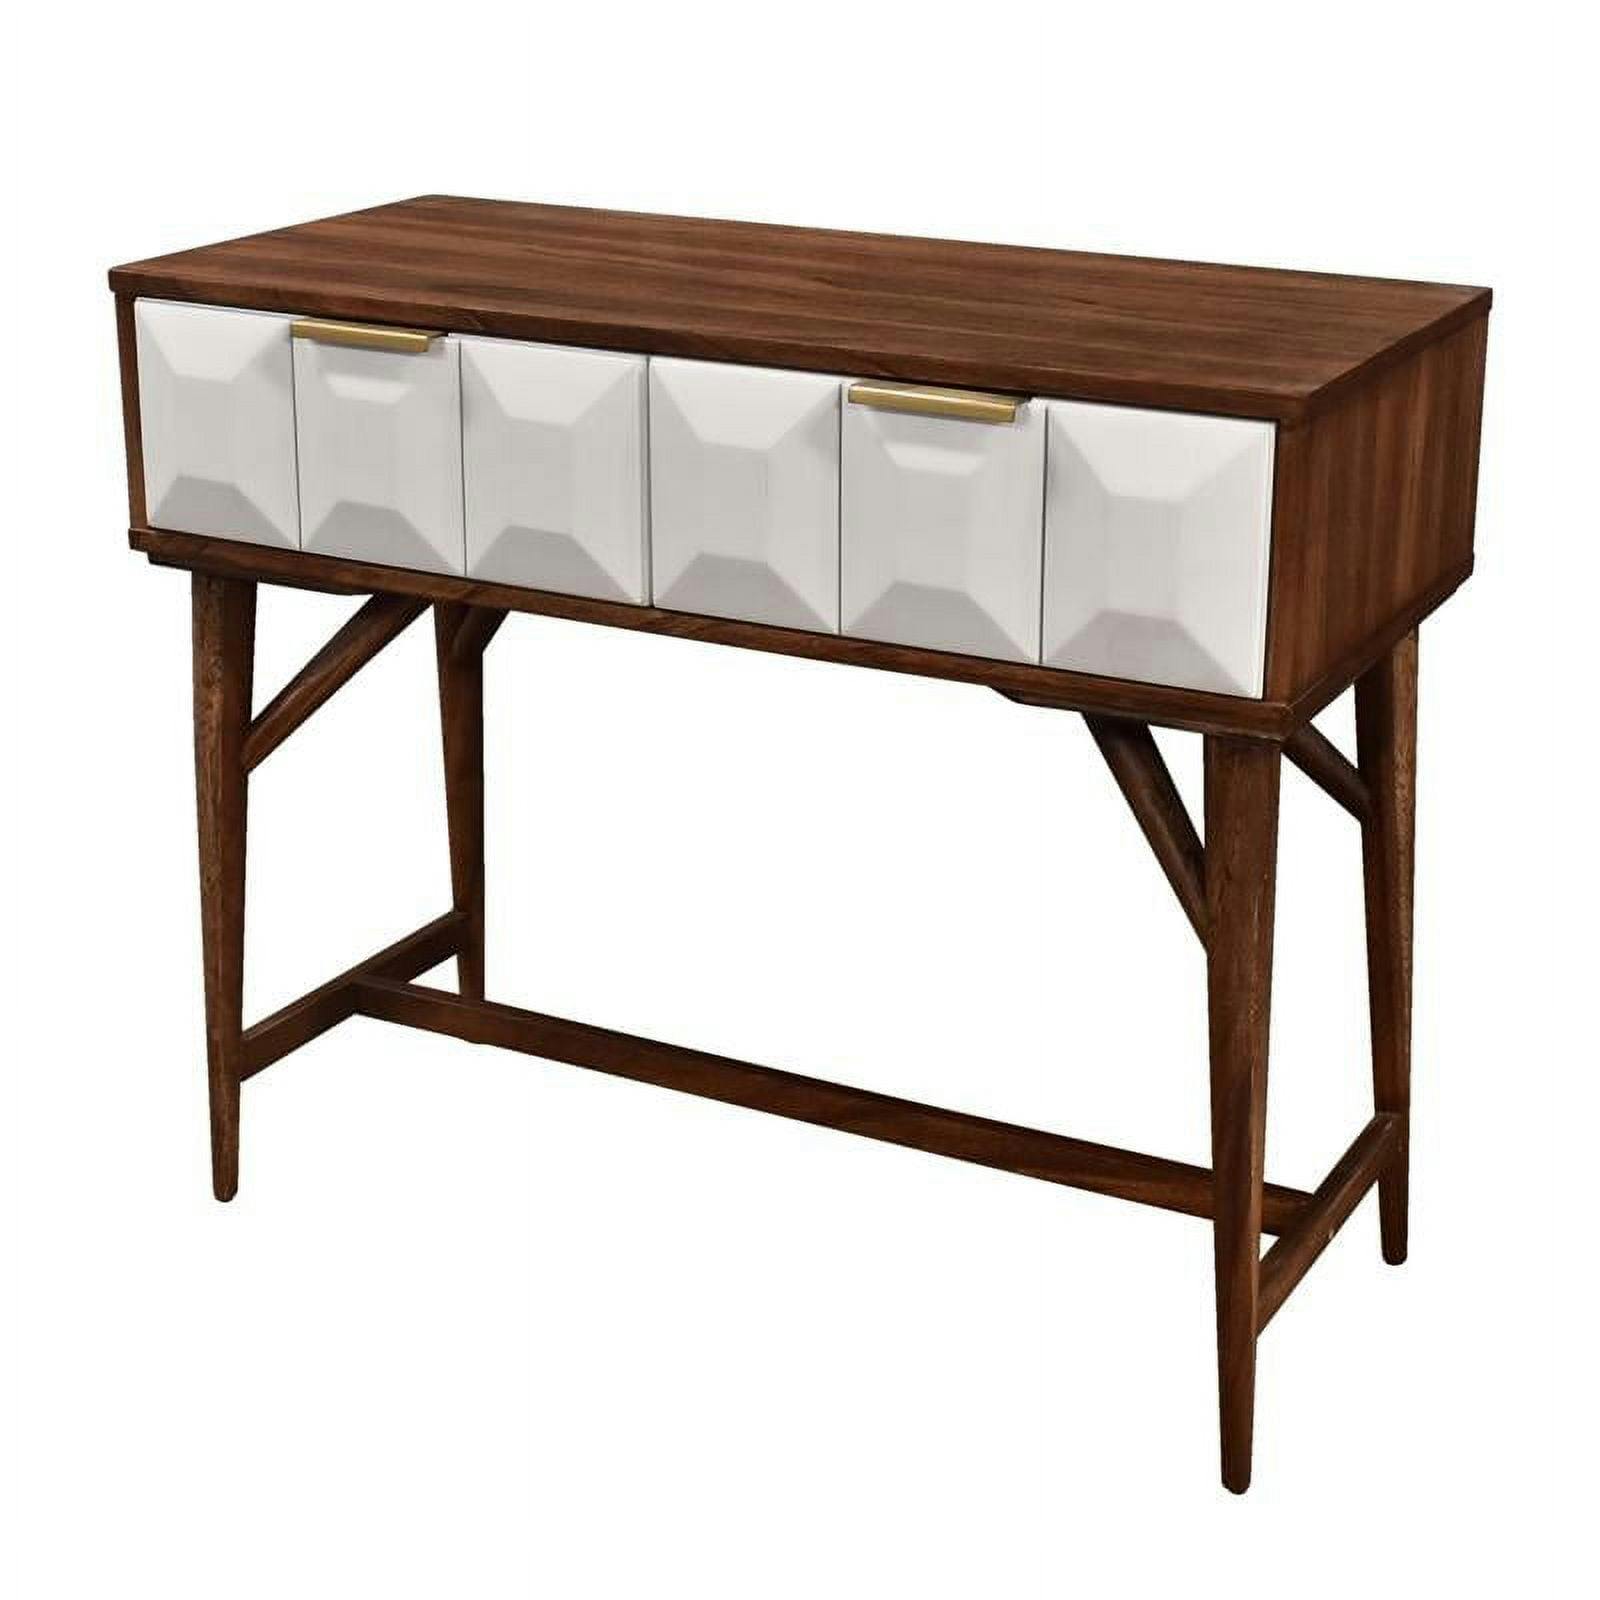 Burnished Walnut Mid-Century Console Table with Storage